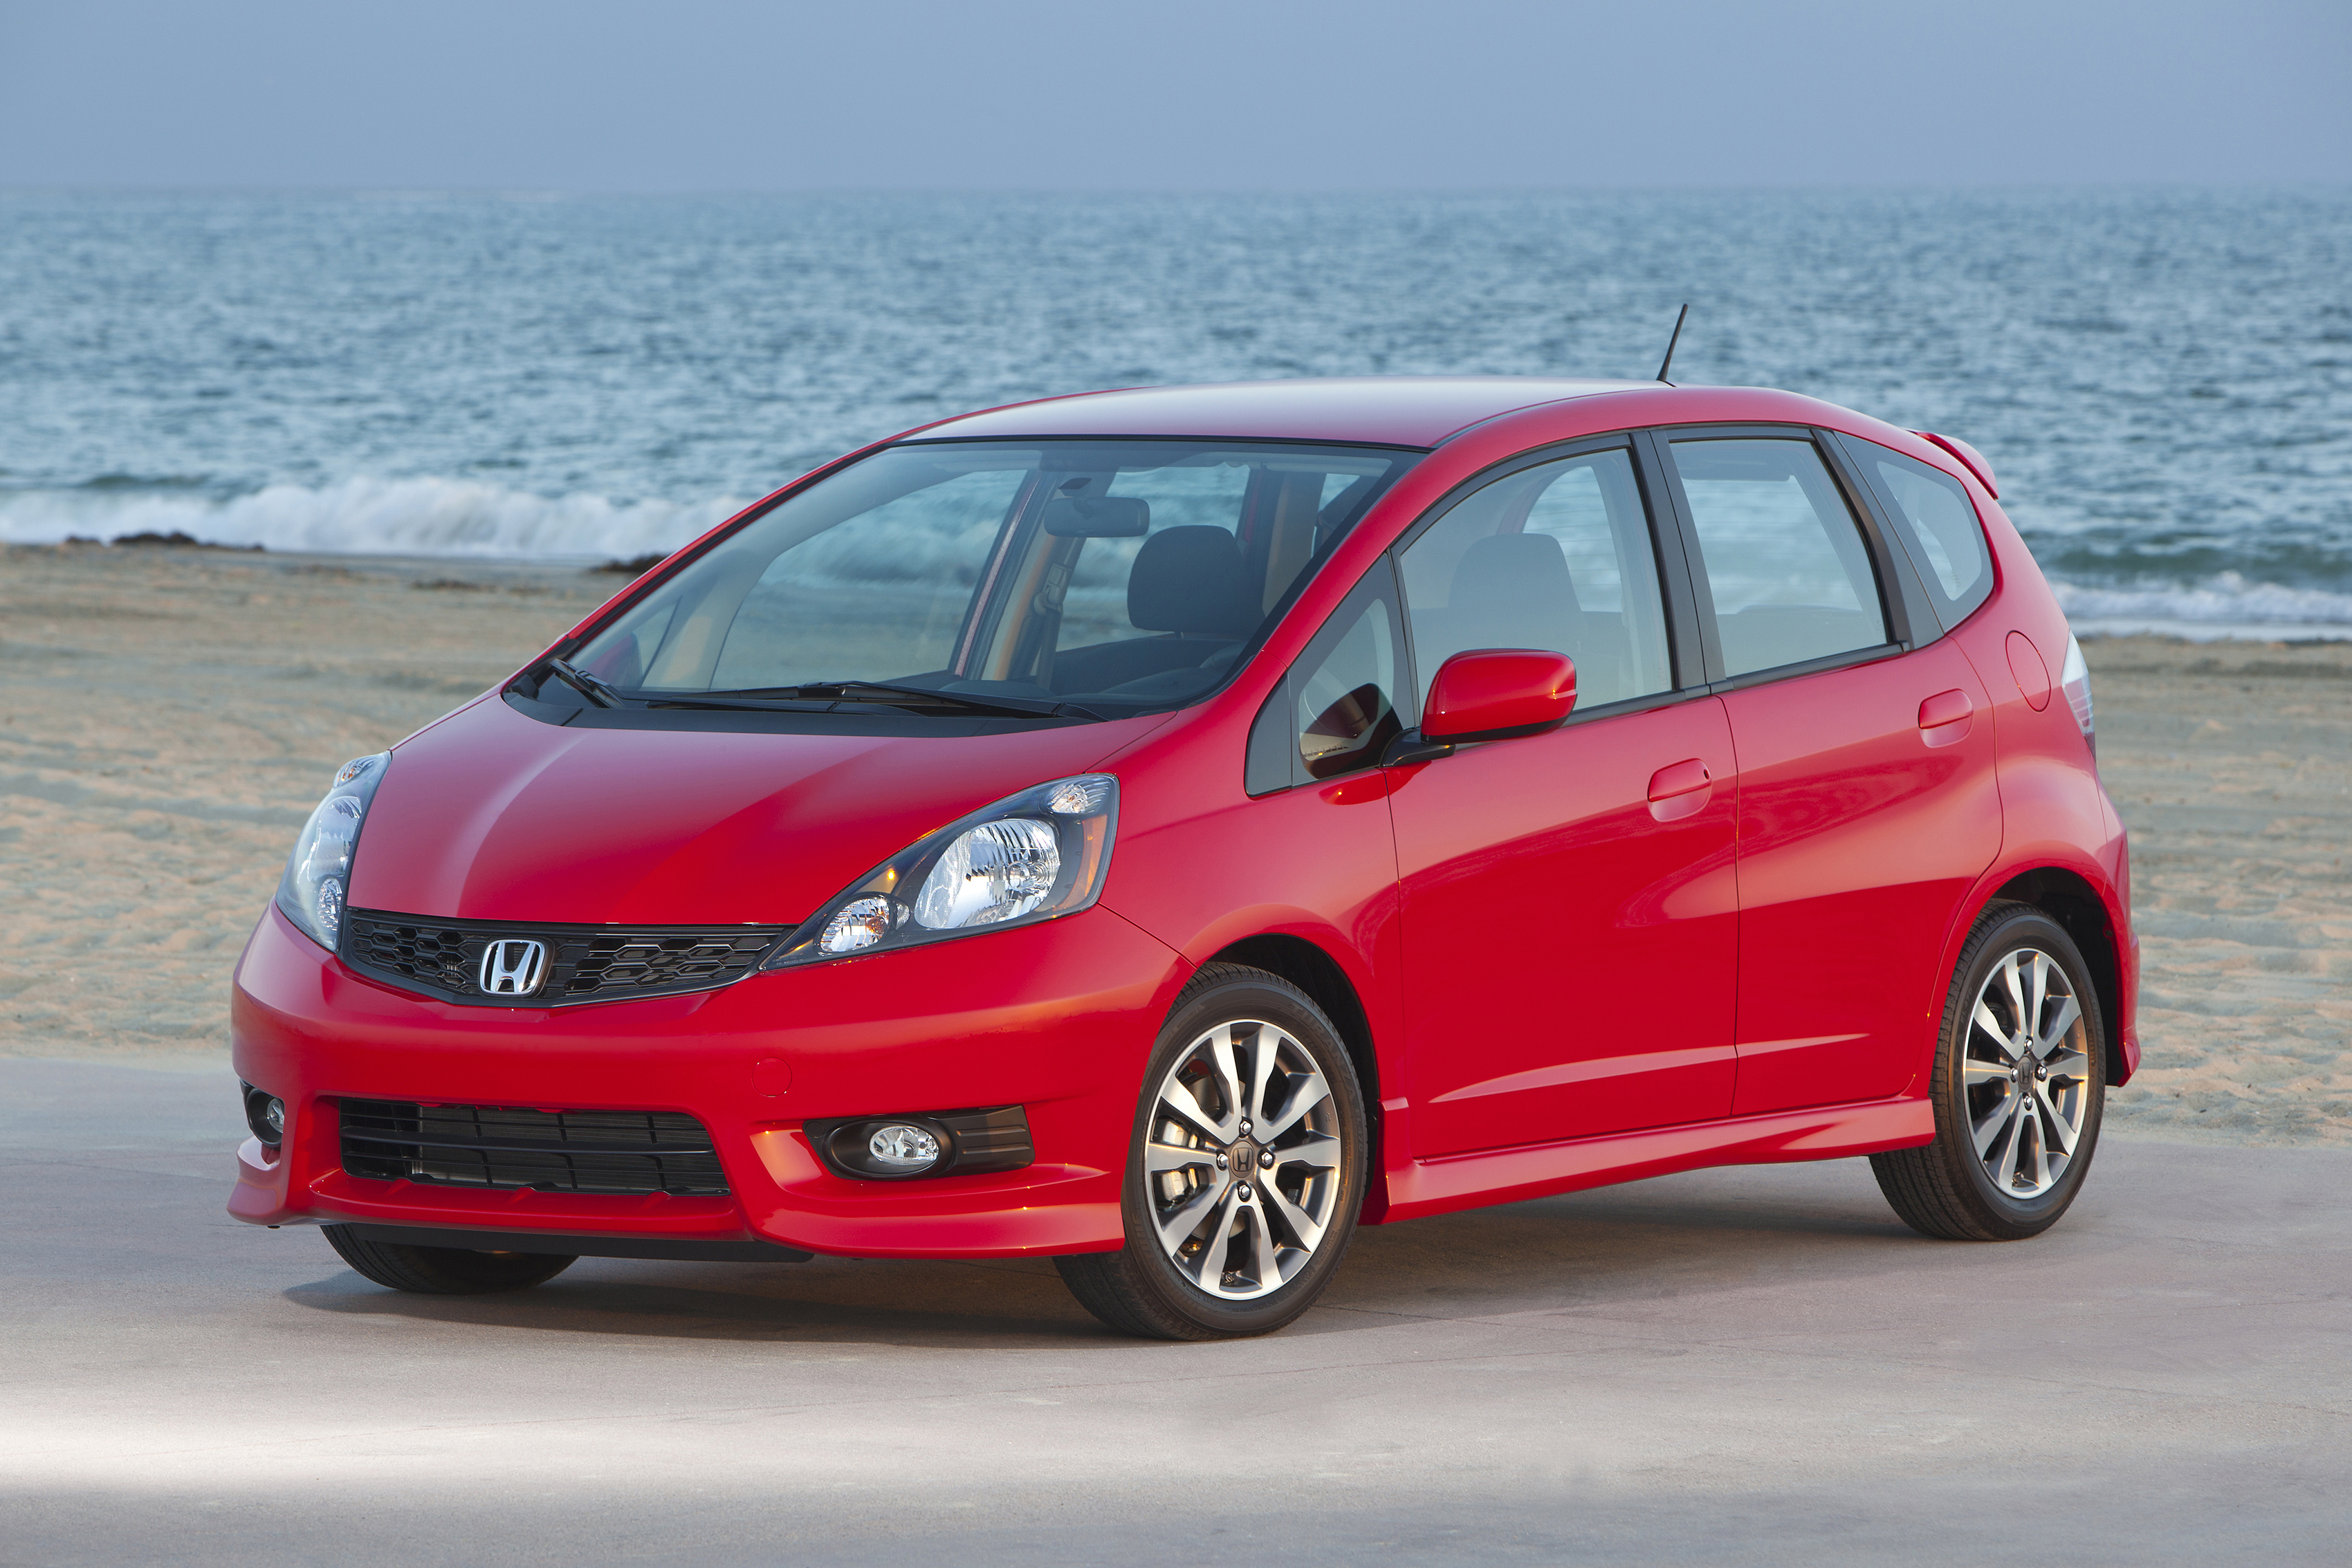 Honda to Recall 960,000 Fits, and Other Models